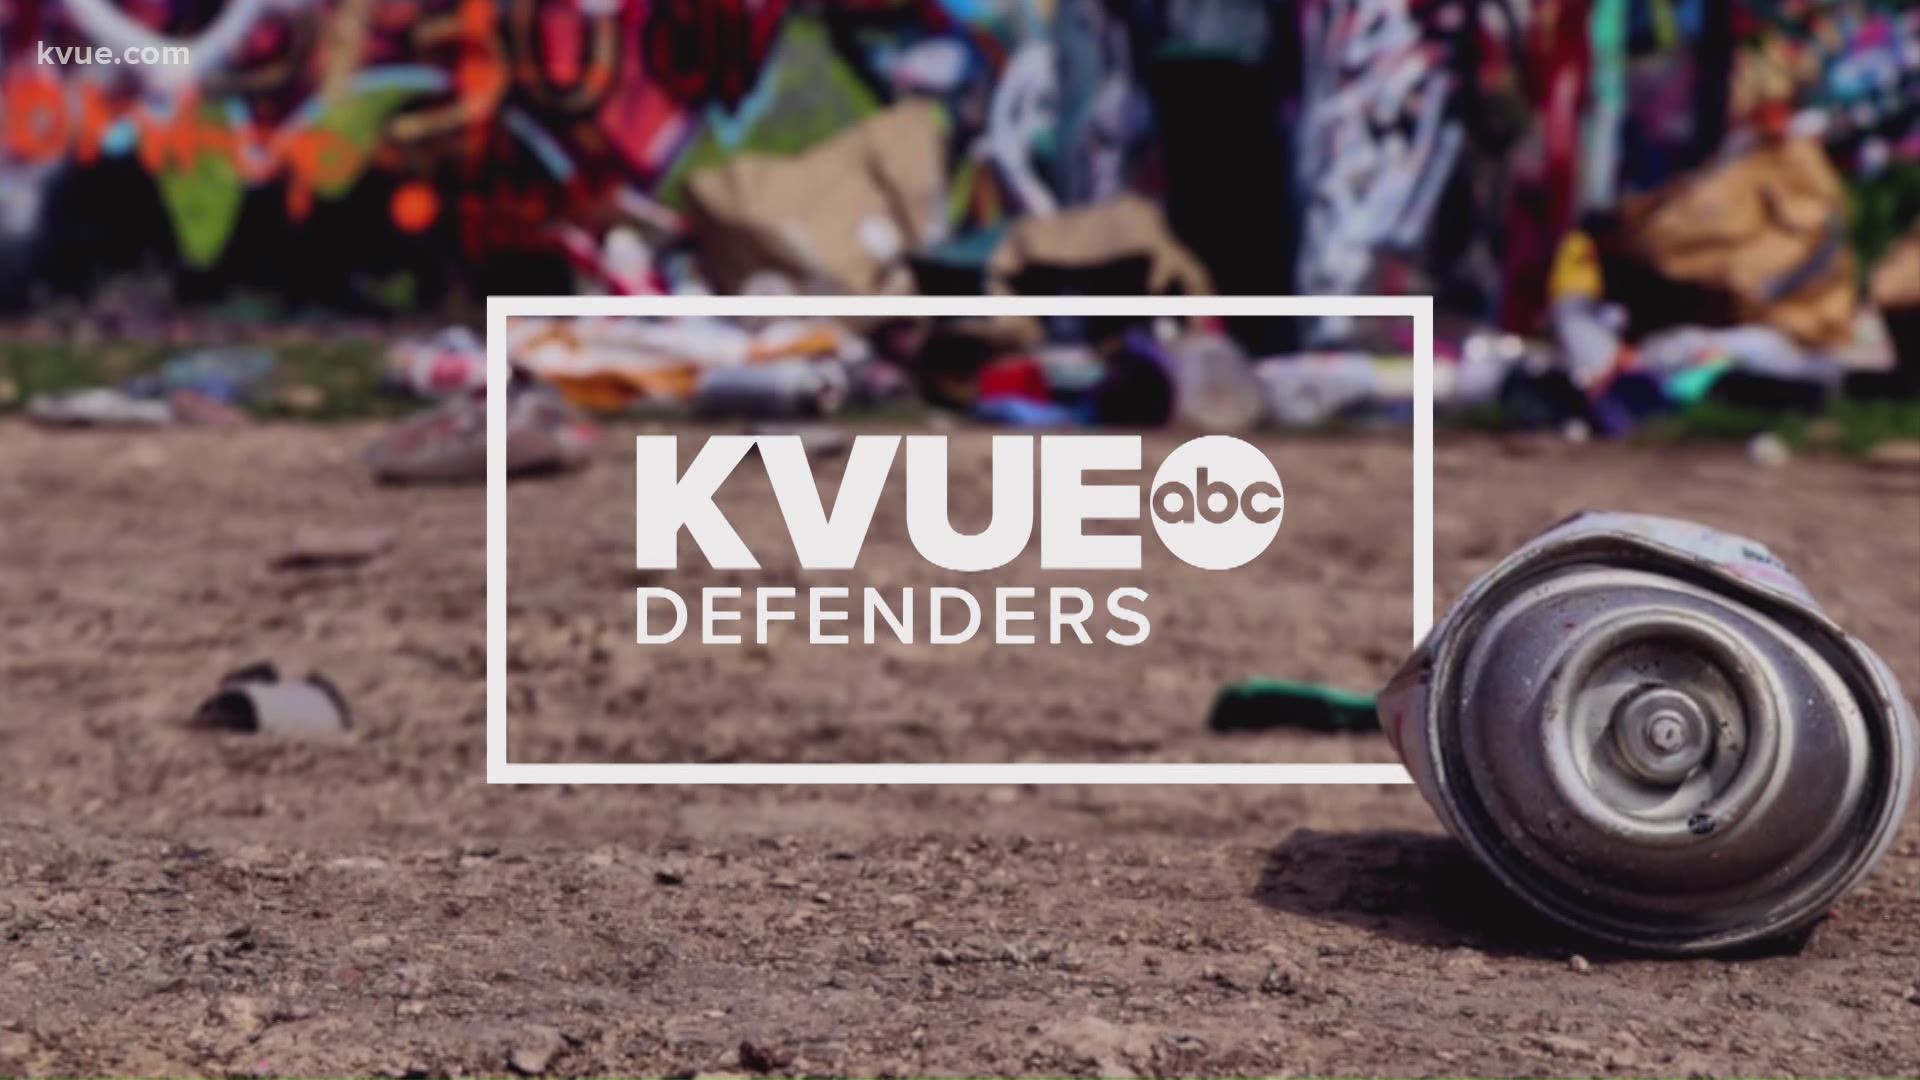 The KVUE Defenders are answering your COVID-19 questions. If you have one you'd like for us to answer, text your question to 512-459-9442.